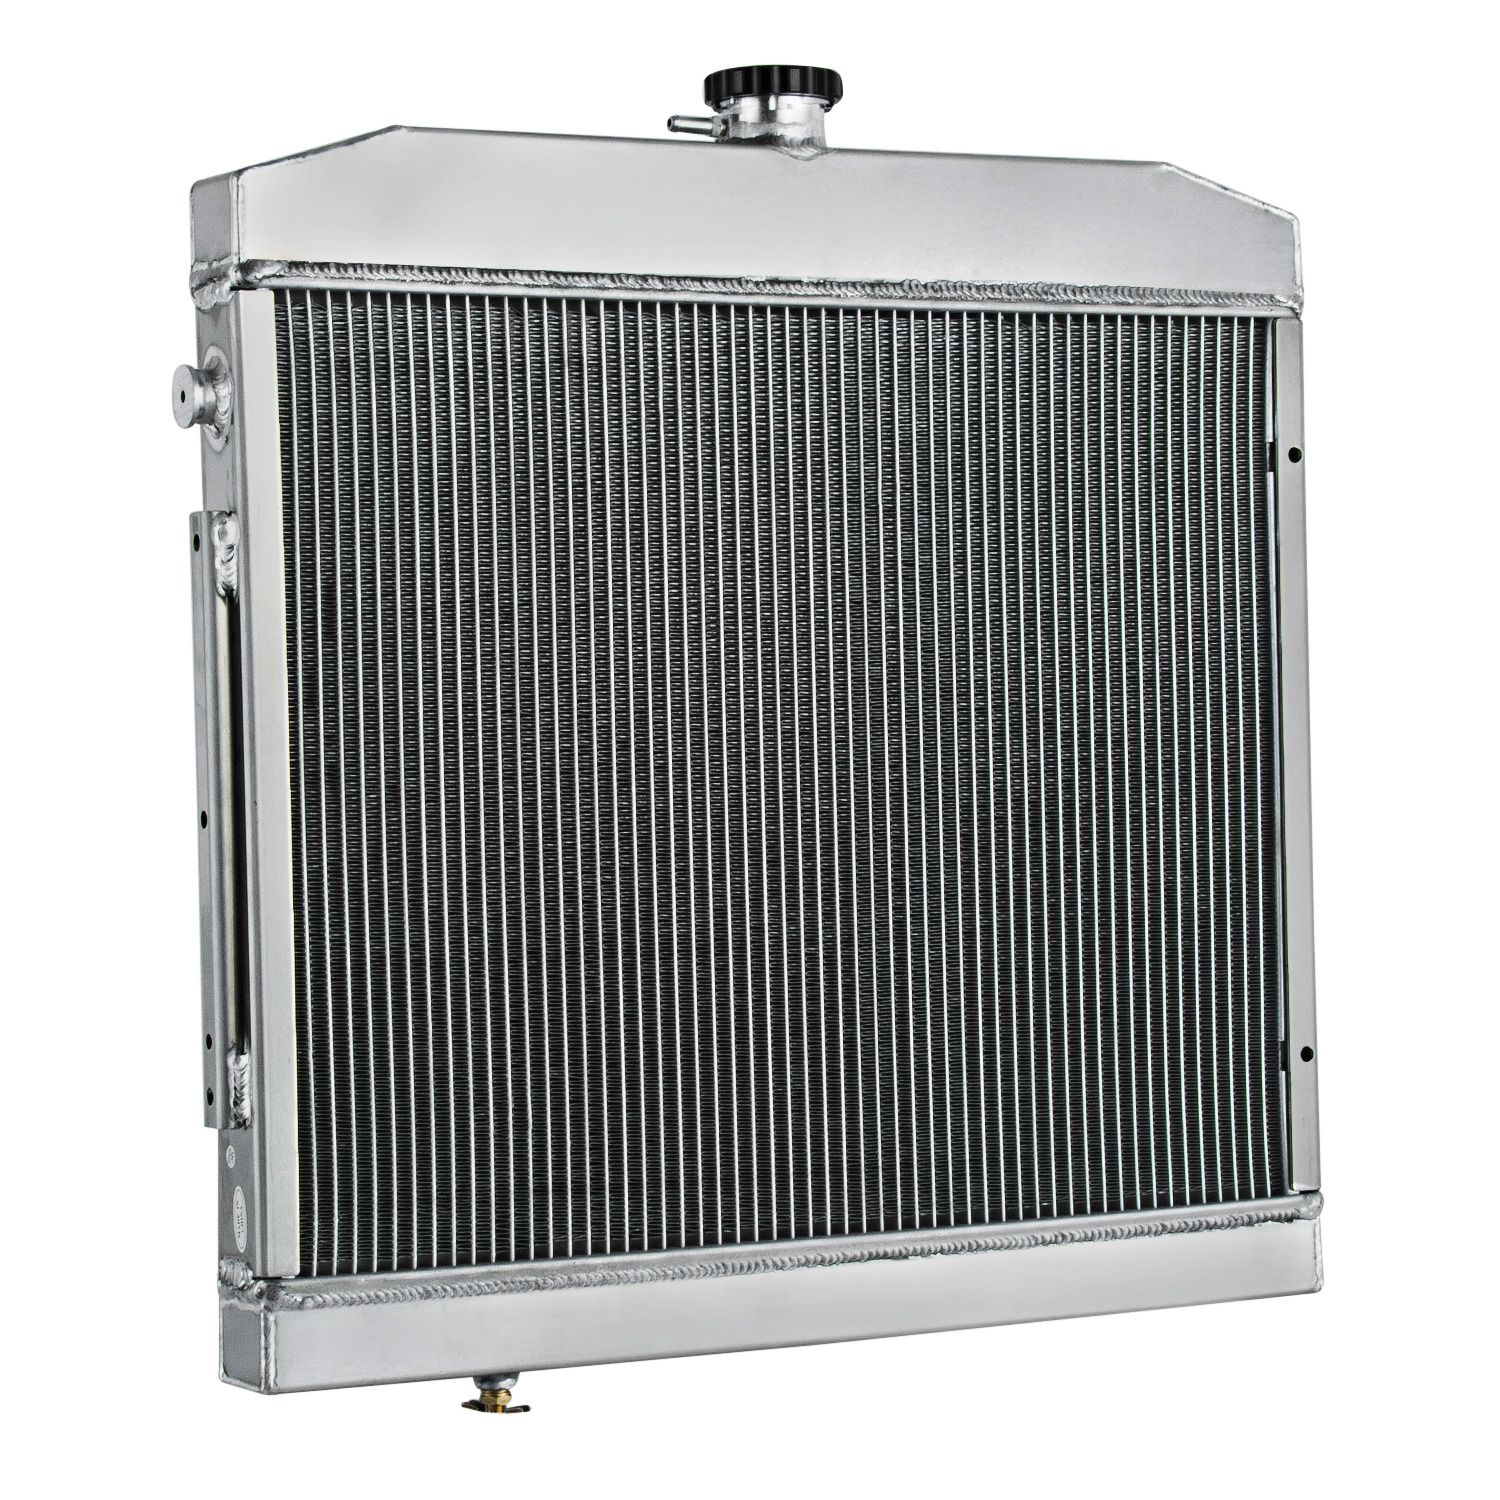 2-Row Radiator For 1968-1972 Mercedes Benz S-Class W108 W109 280SEL AT /